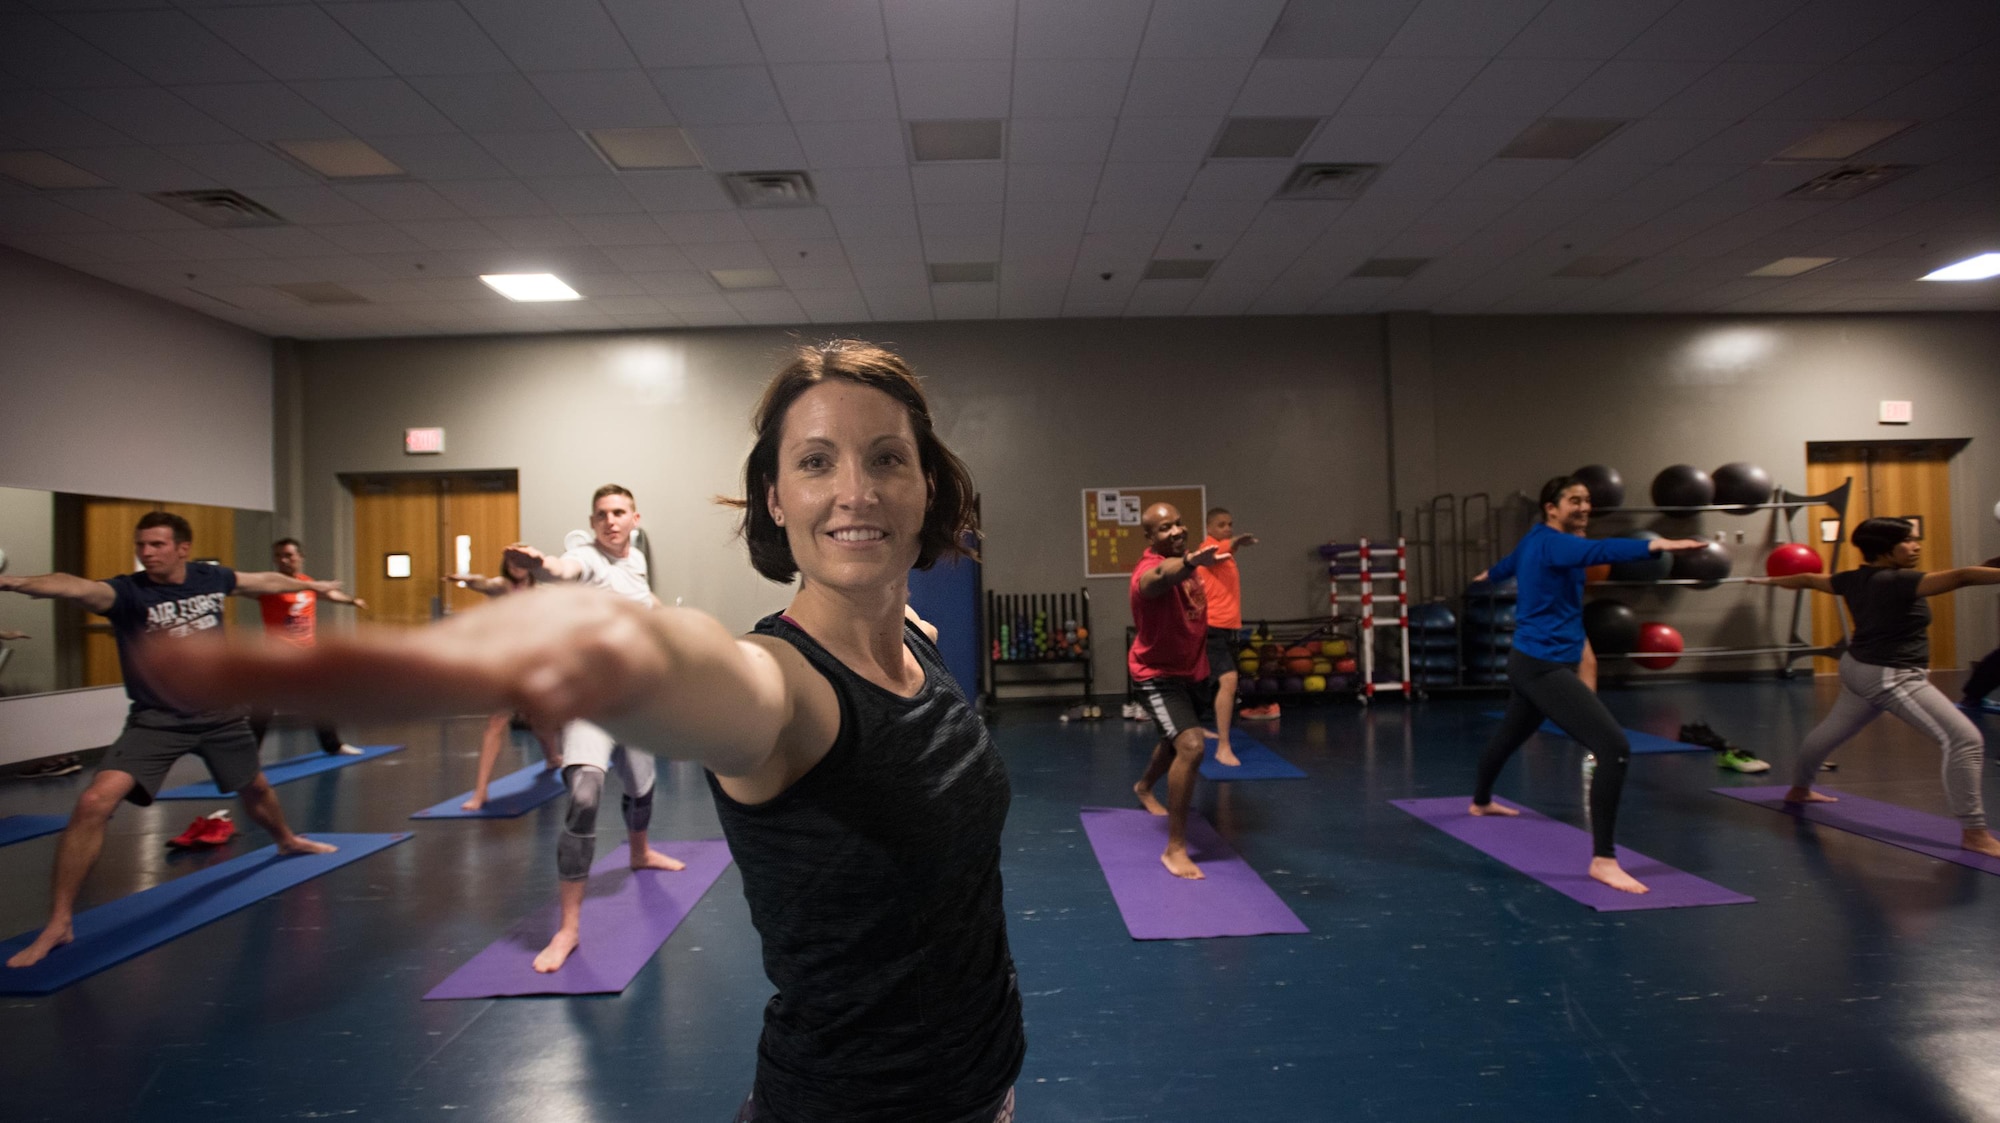 Lt. Col. Janelle Macaulay, the 305th Operations Support Squadron commander, leads members of her unit in a yoga class April 19, 2016, at the Falcon Fitness Center at Joint Base McGuire-Dix-Lakehurst, N.J. Yoga is one of several mental and physical fitness initiatives Macaulay and her leadership have implemented in the squadron. (U.S. Air Force photo/Staff Sgt. Katherine Tereyama)